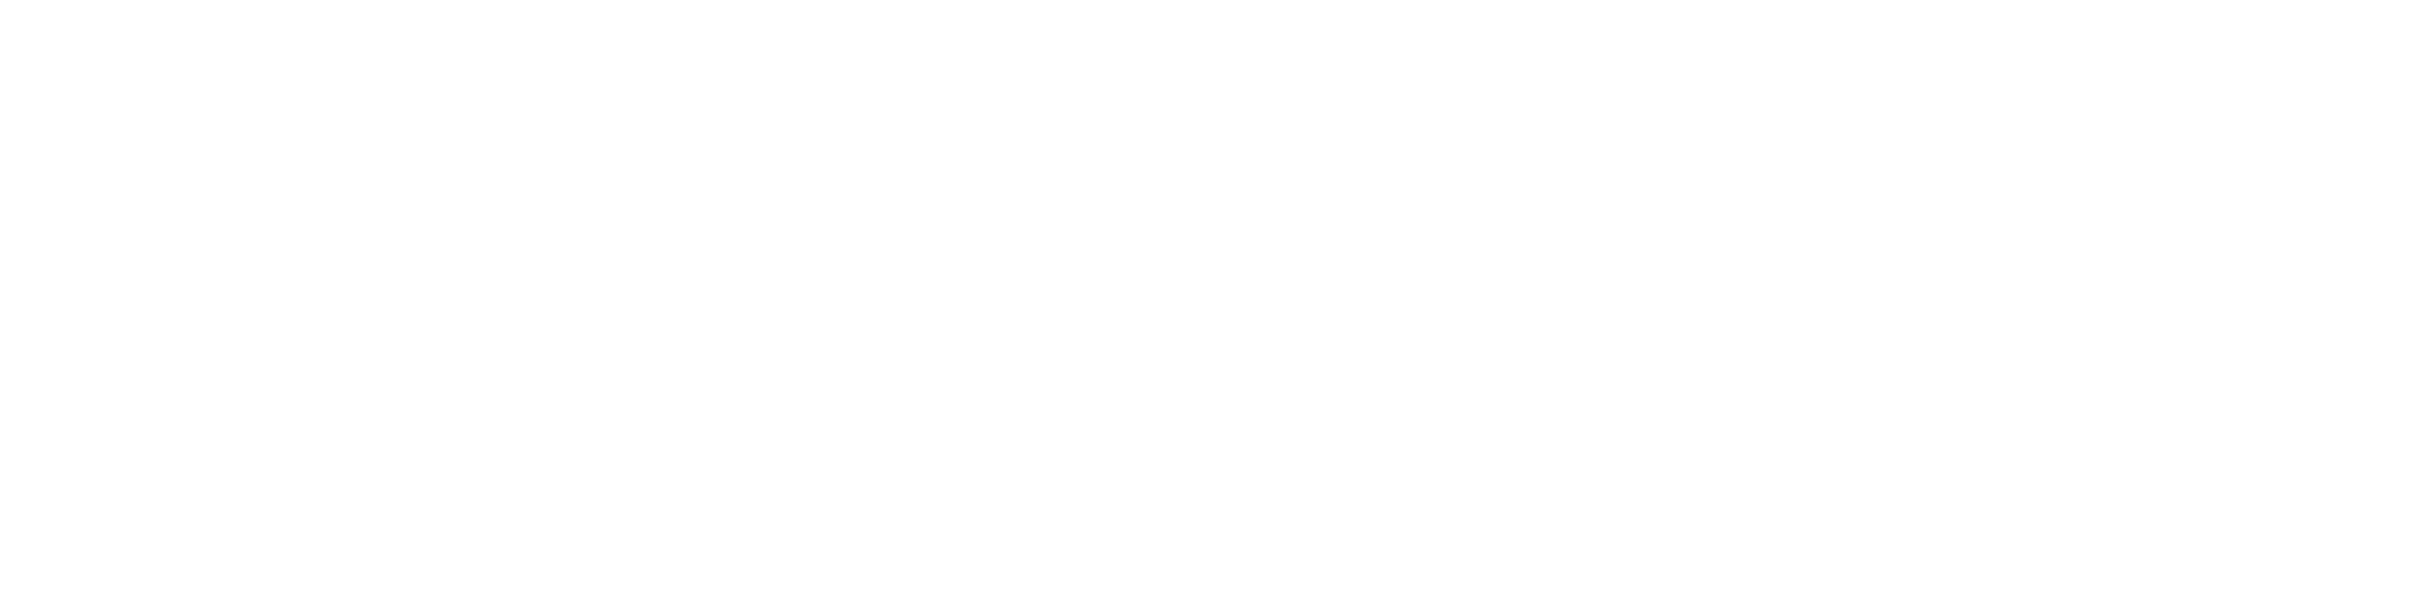 The Law Firm of Arianna M. Mendez, PLLC